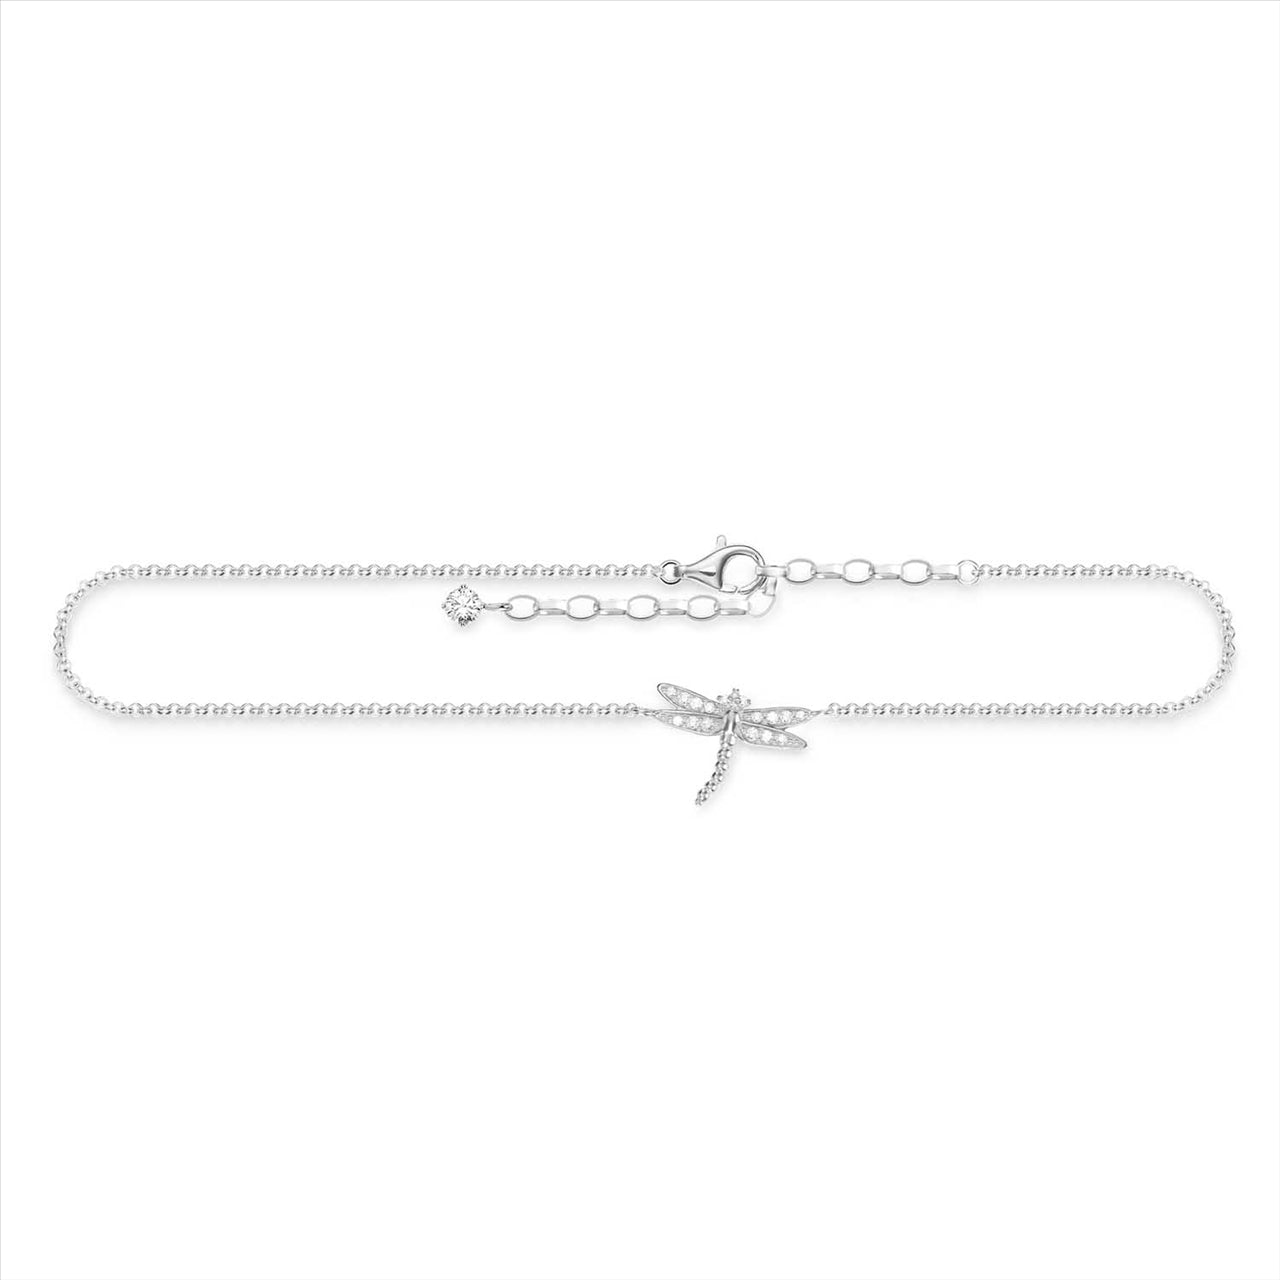 Thomas Sabo "Anklet" Sterling Silver Cubic Zirconia Dragonfly Anklet